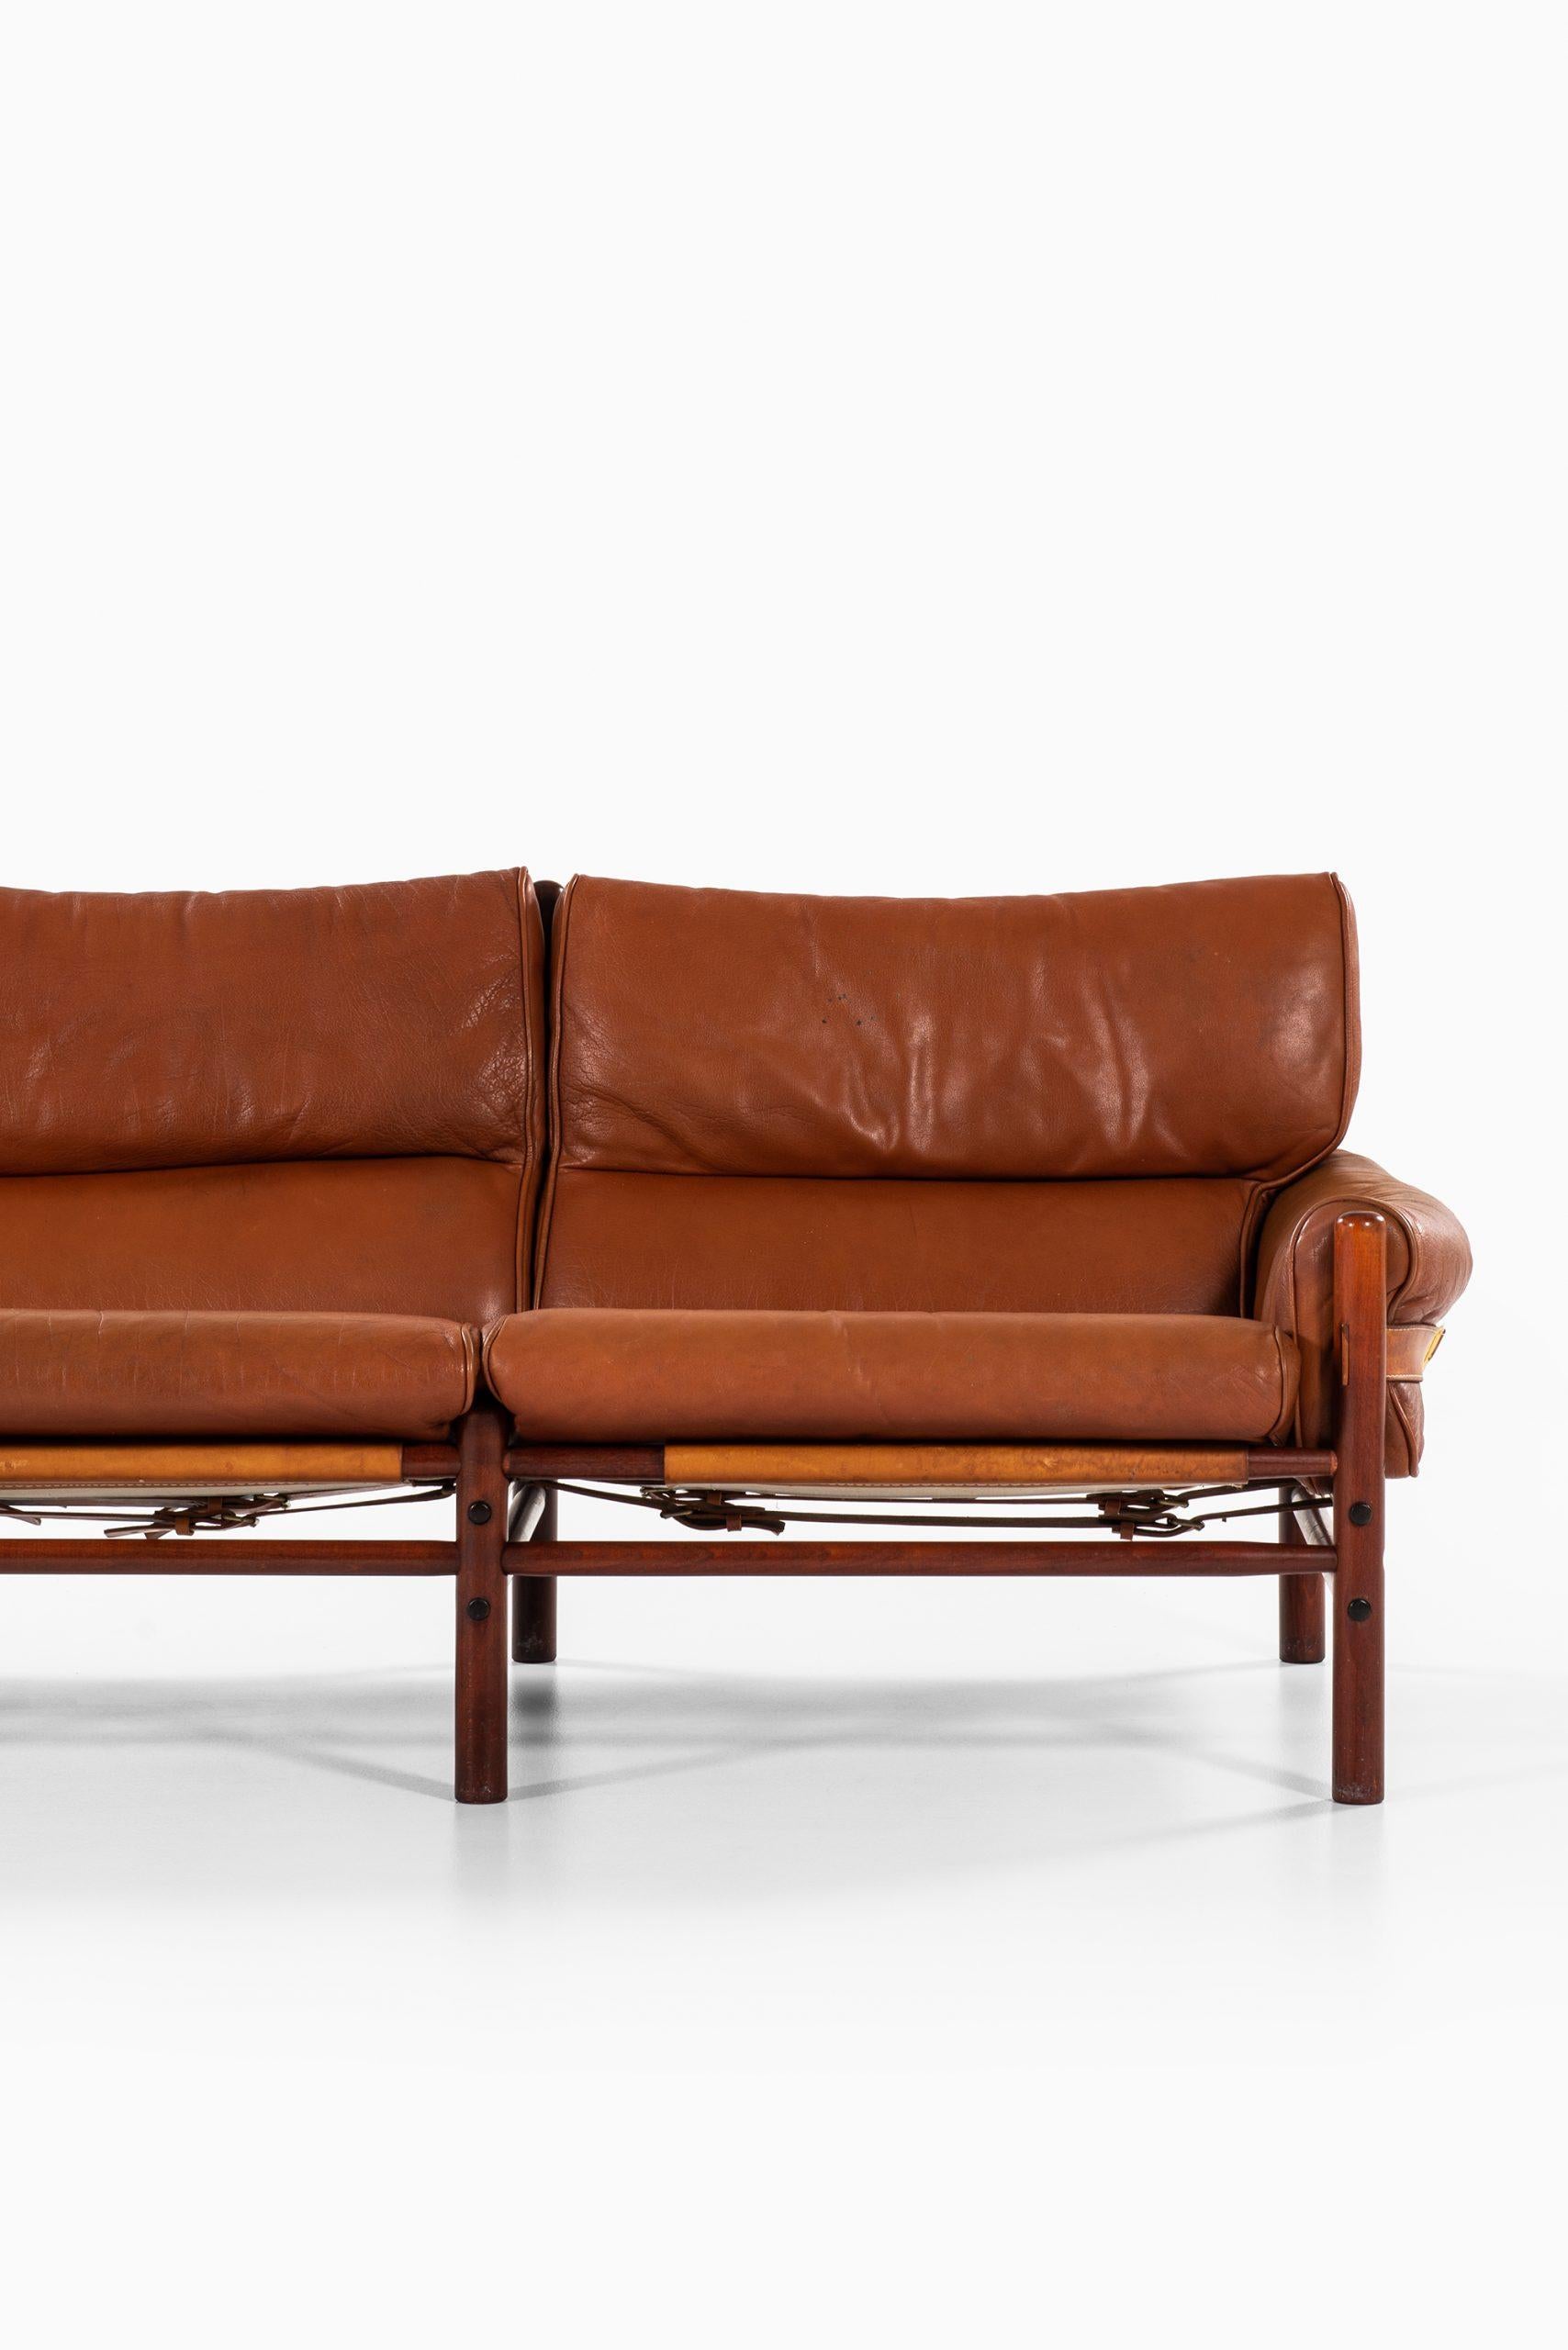 3-seat sofa model Kontiki designed by Arne Norell. Produced by Arne Norell AB in Aneby, Sweden.